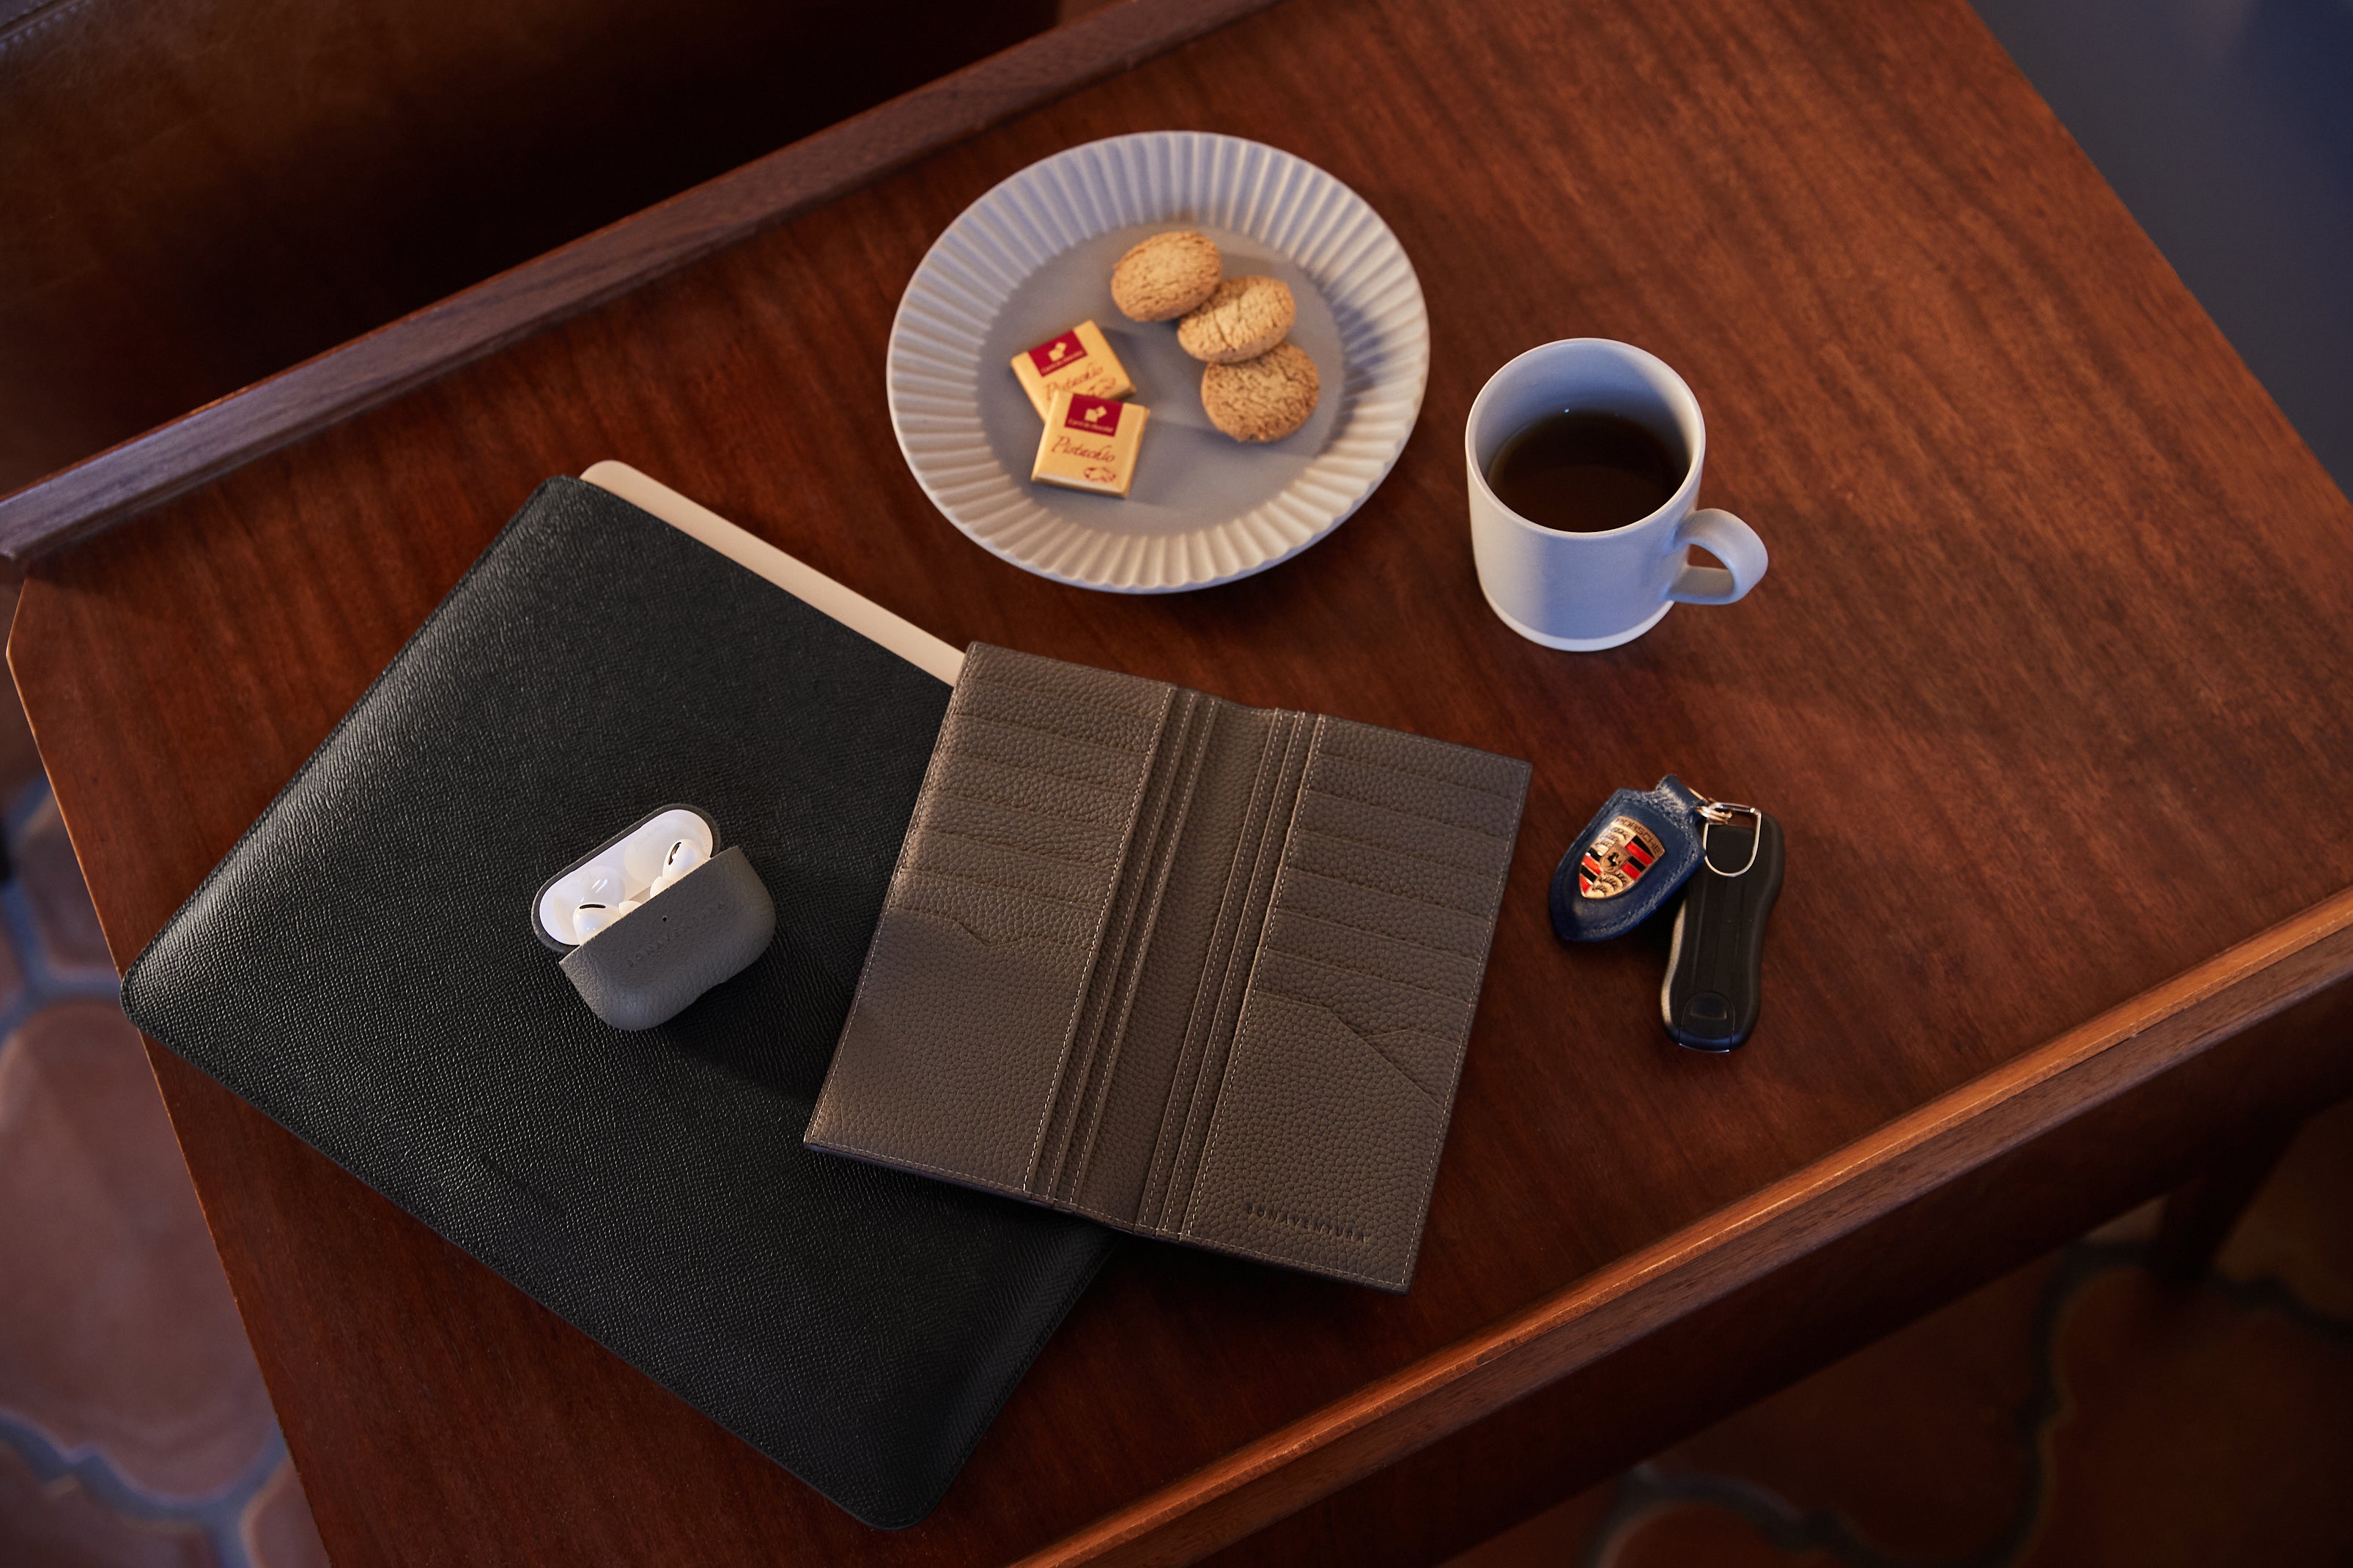 Elegant BONAVENTURA accessories, including leather wallets and leather AirPods cases, arranged on a stylish desk.